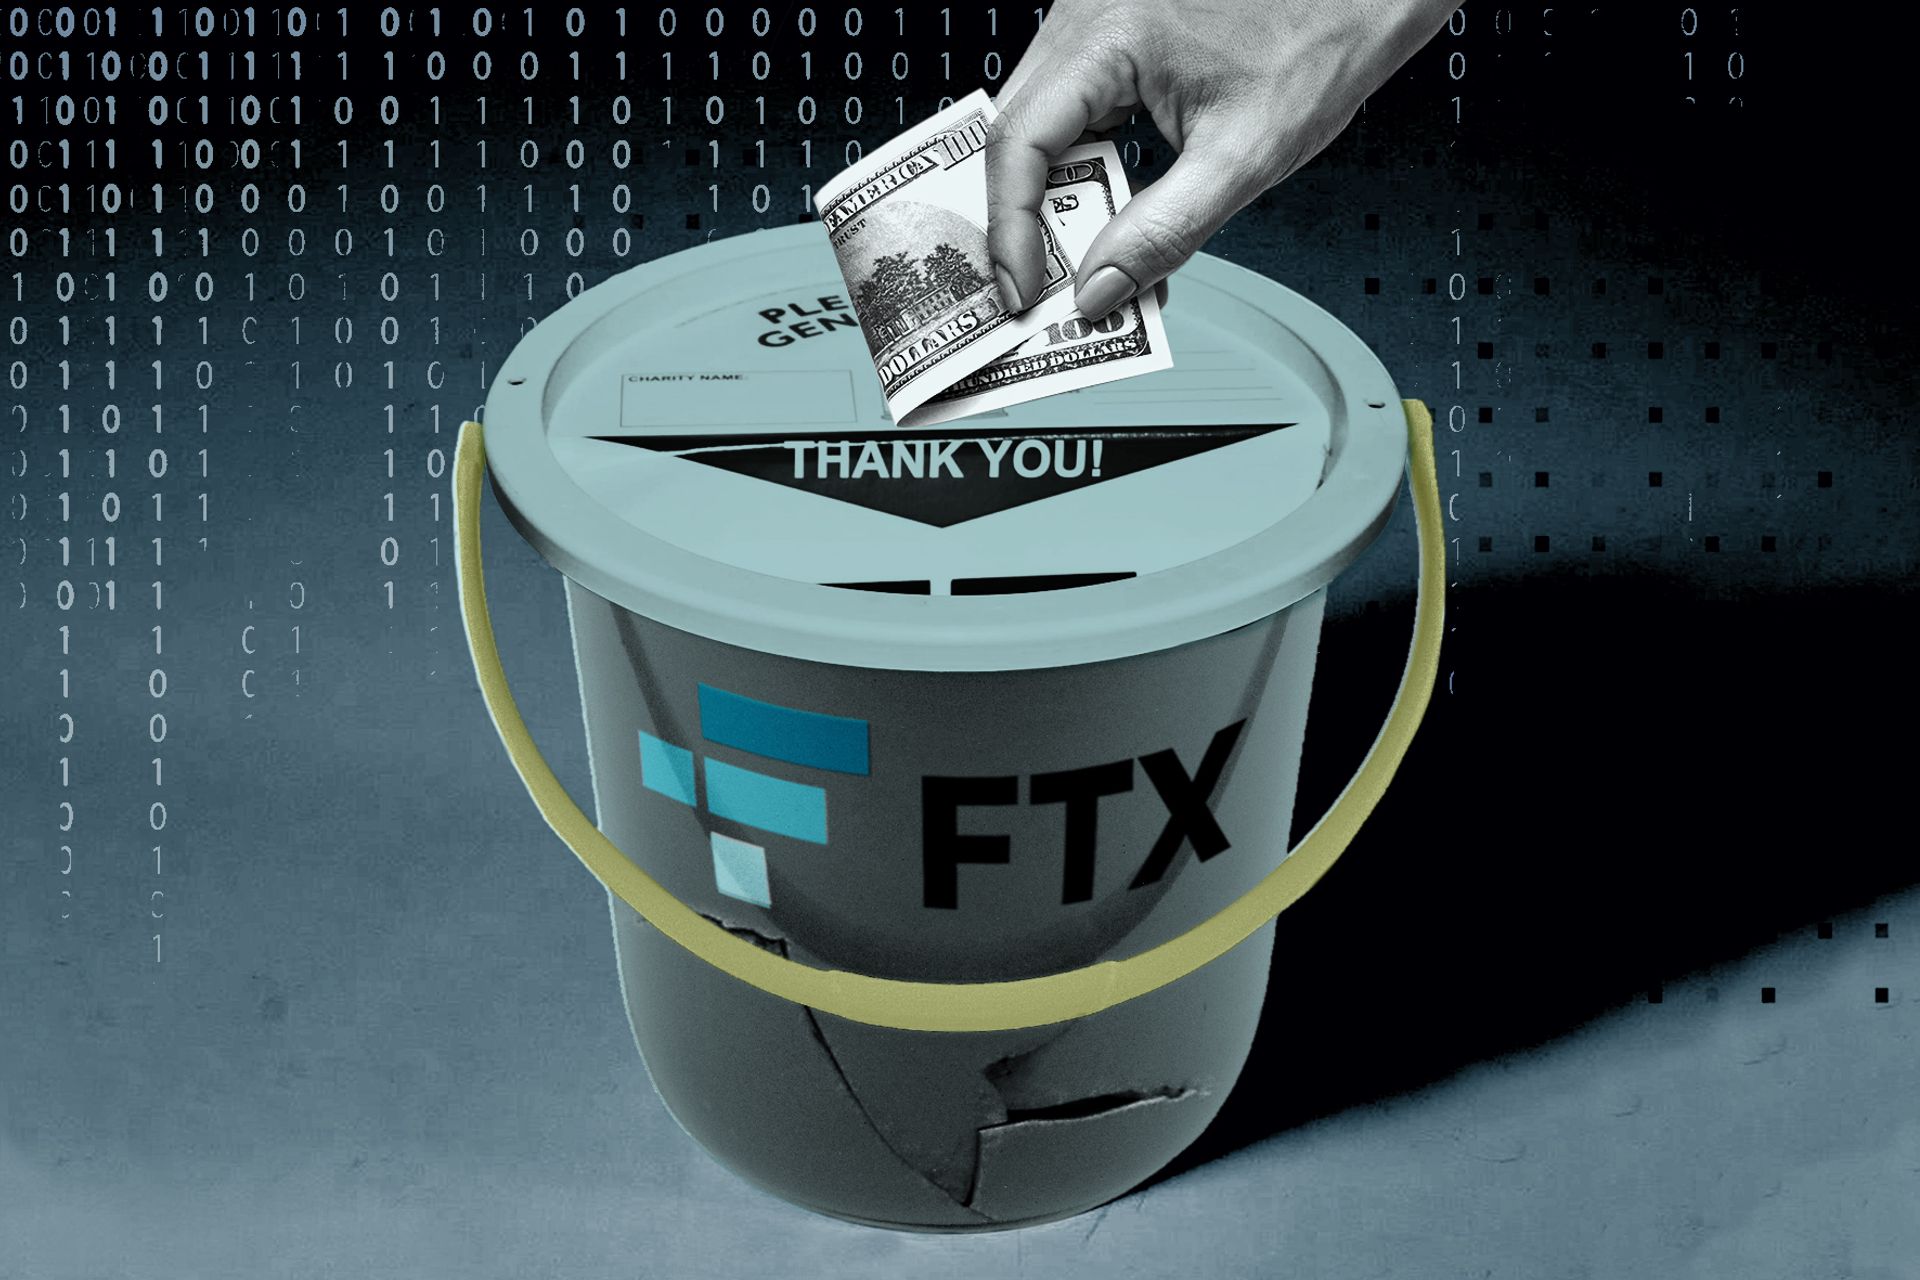 The crypto currency exchange FTX recently filed for bankruptcy, devastating the whole crypto world. Illustration by Katherine Hardy